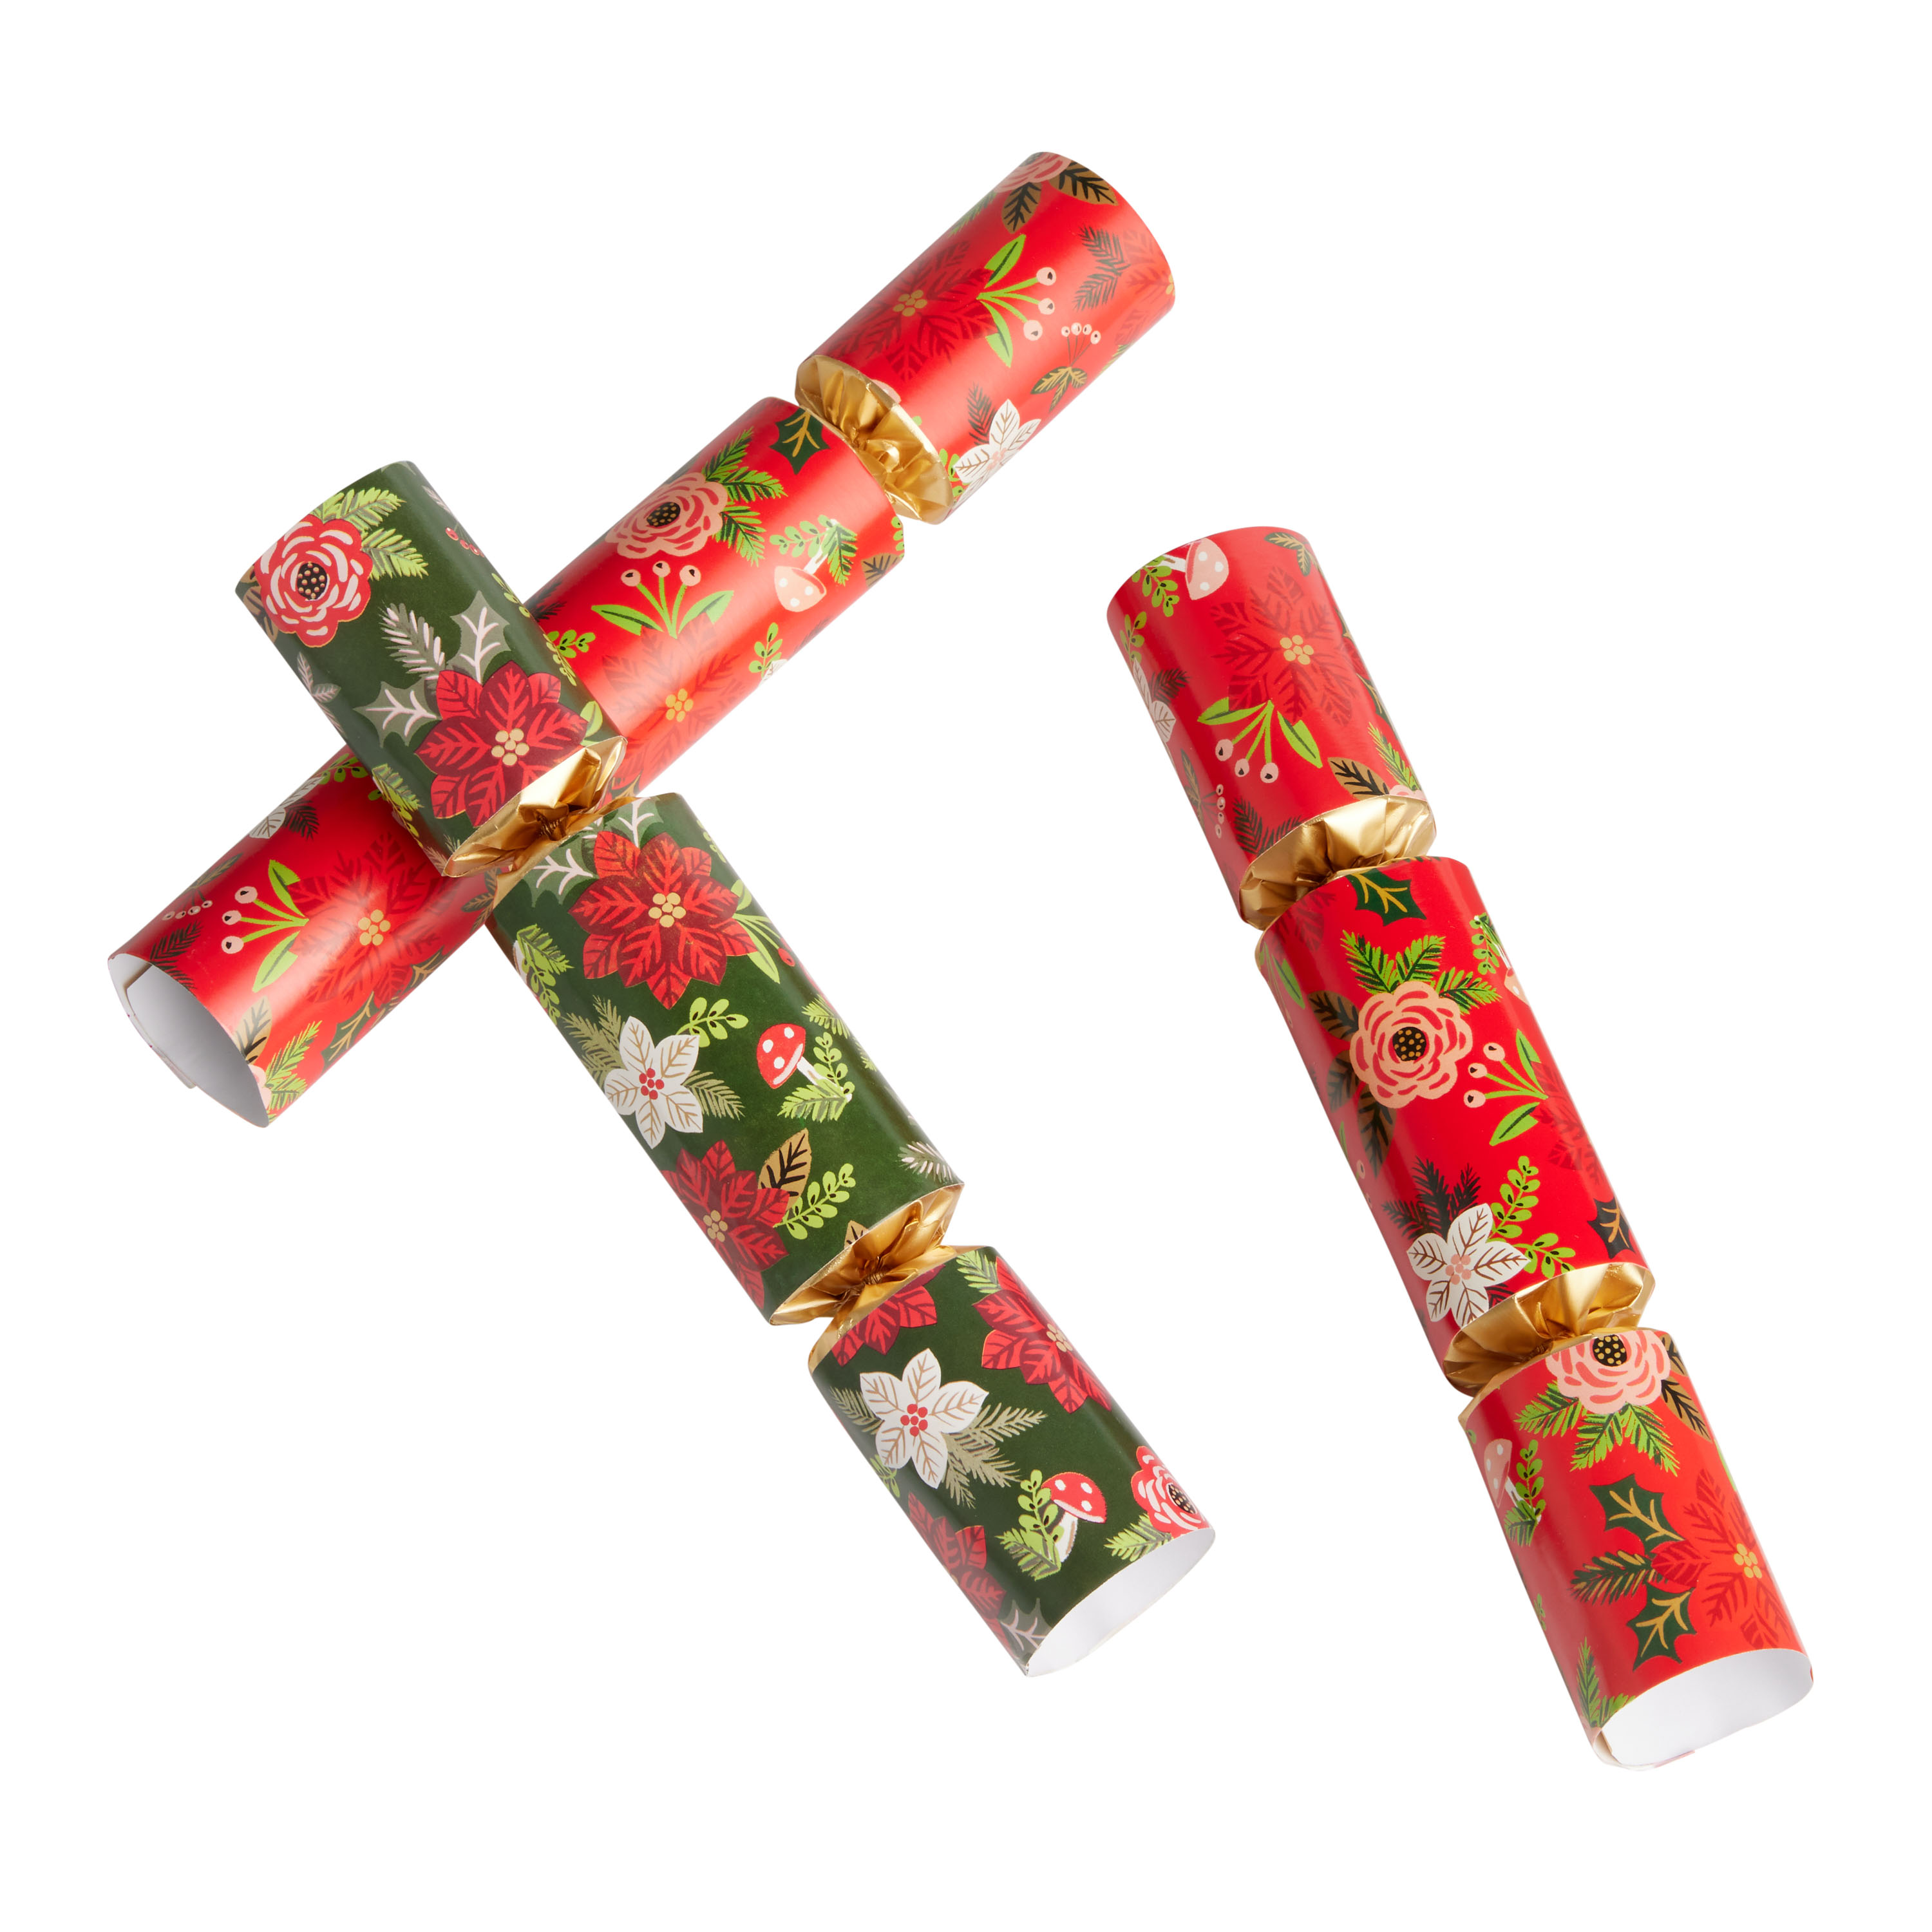 Festive Holiday Crackers Set of 8 by Option 2